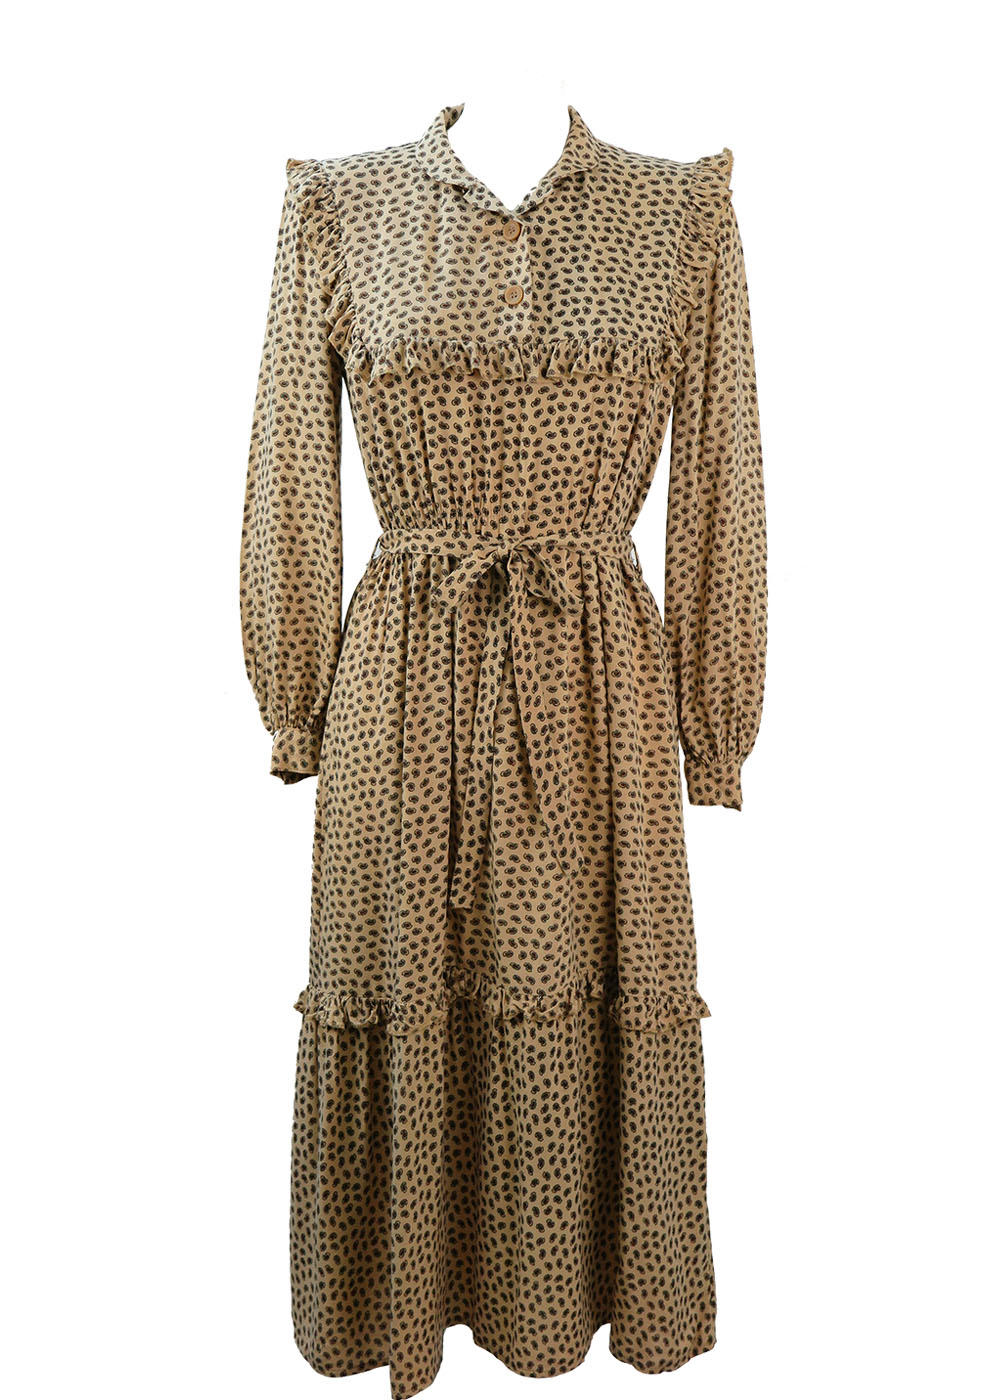 Long Camel Coloured Prairie Dress with Ruffle Detail & Paisley Pattern ...